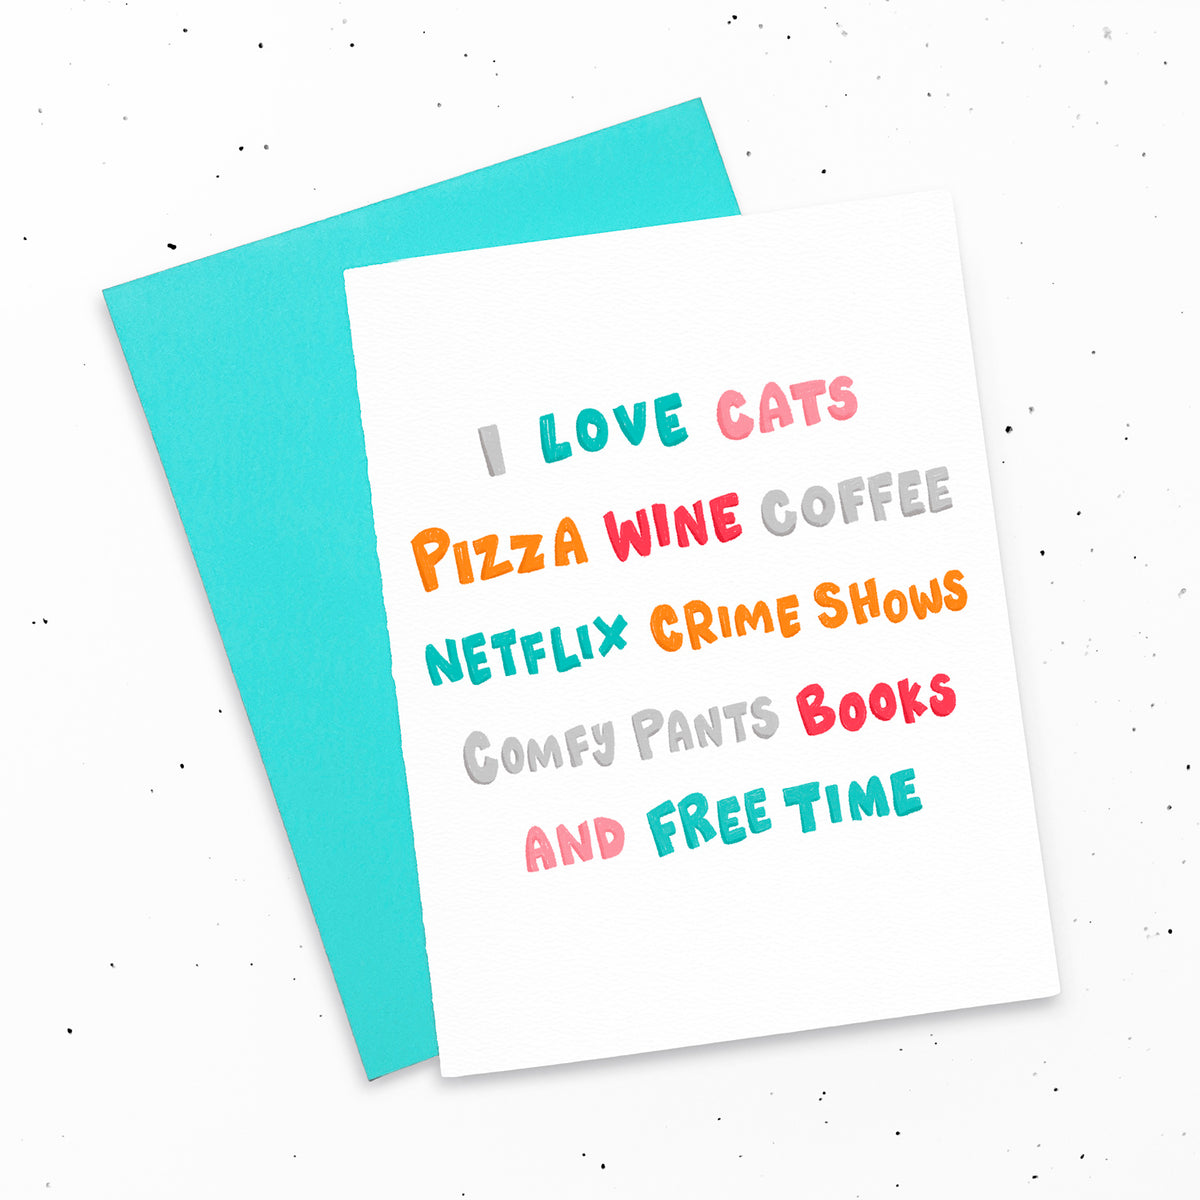 I love cats, pizza, wine, coffee, Netflix, crime shows, comfy pants, books and free time ~ Fun greeting card by My Cat Is People